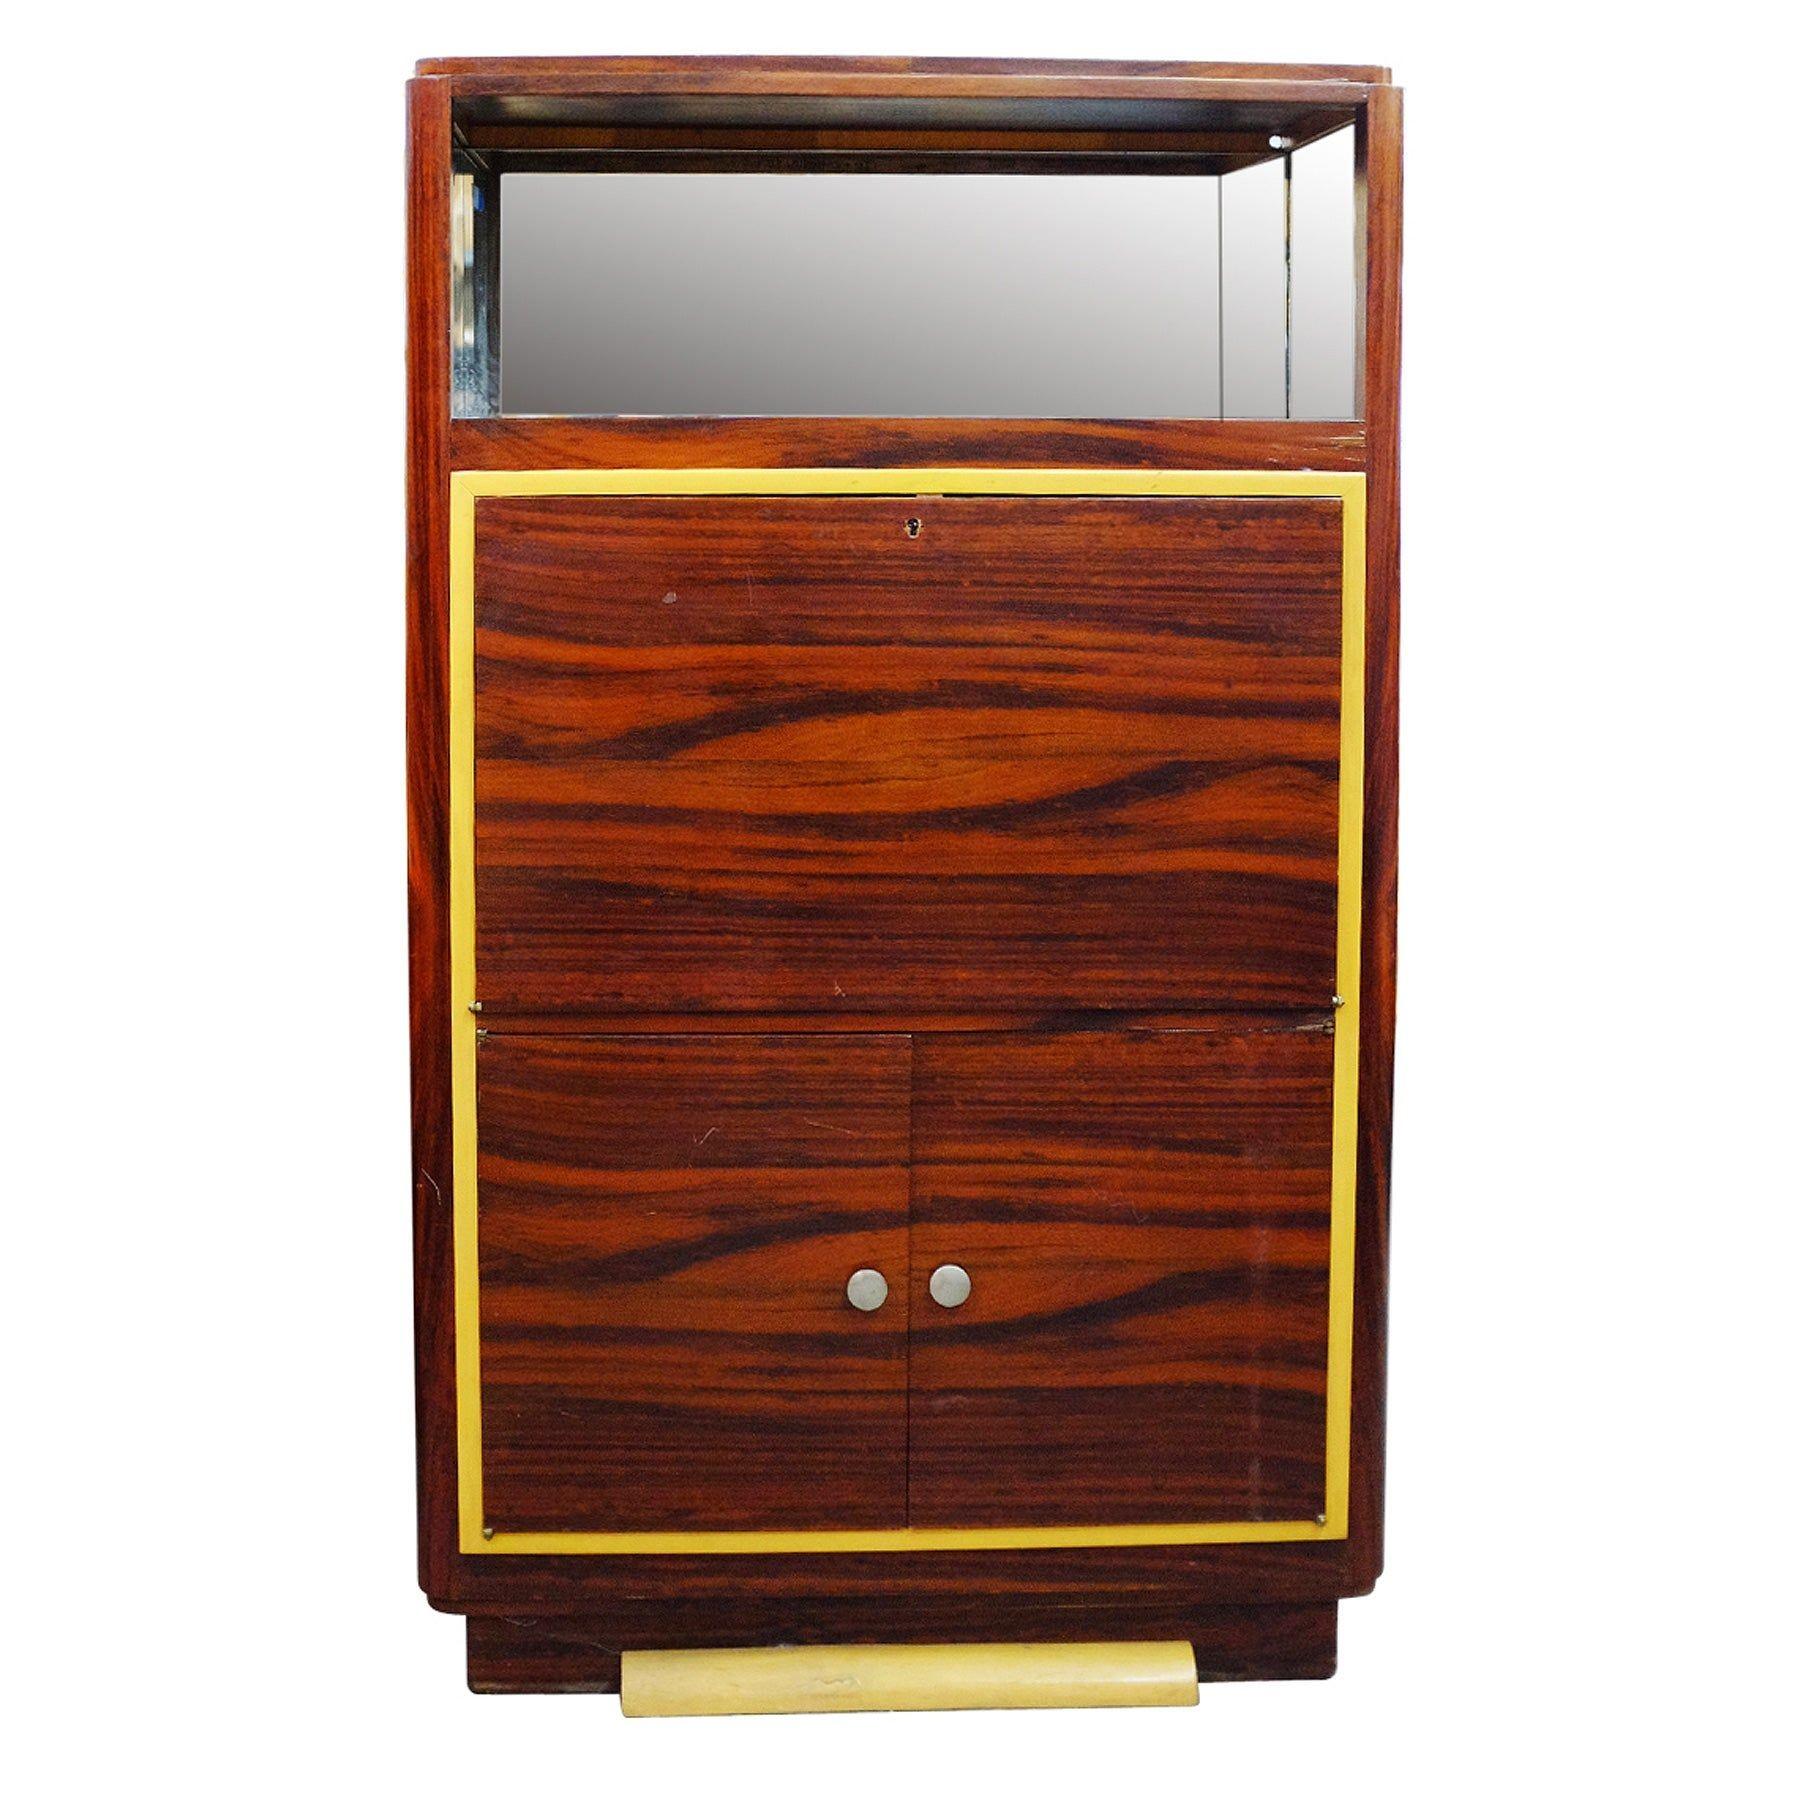 Rare late Art Deco vitrine cabinet with a medium stained Macassar veneer and mirror backed bar on top. Underneath is a fold out secretary desk with two large doors which open up to adjustable shelving for storage.

The exterior has great tall skinny